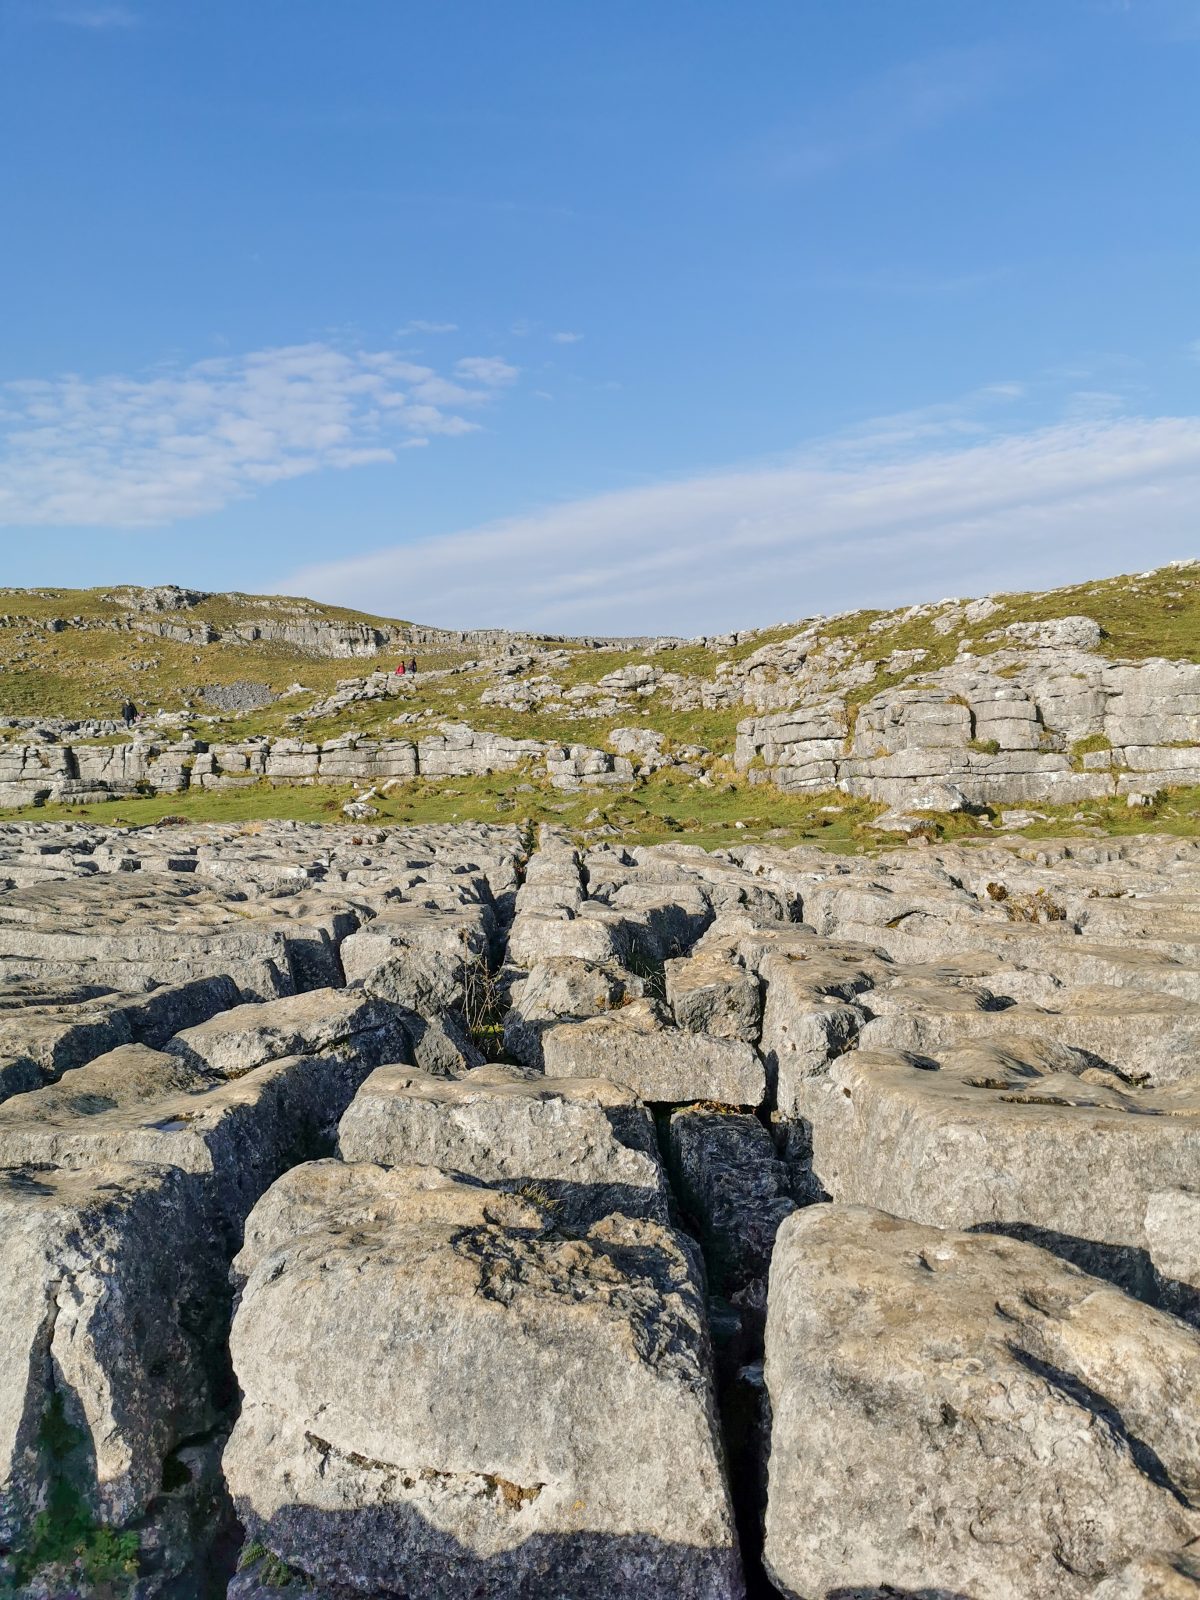 The stunning Yorkshire Dales beauty spot that will be very familiar to Harry Potter fans, The Manc